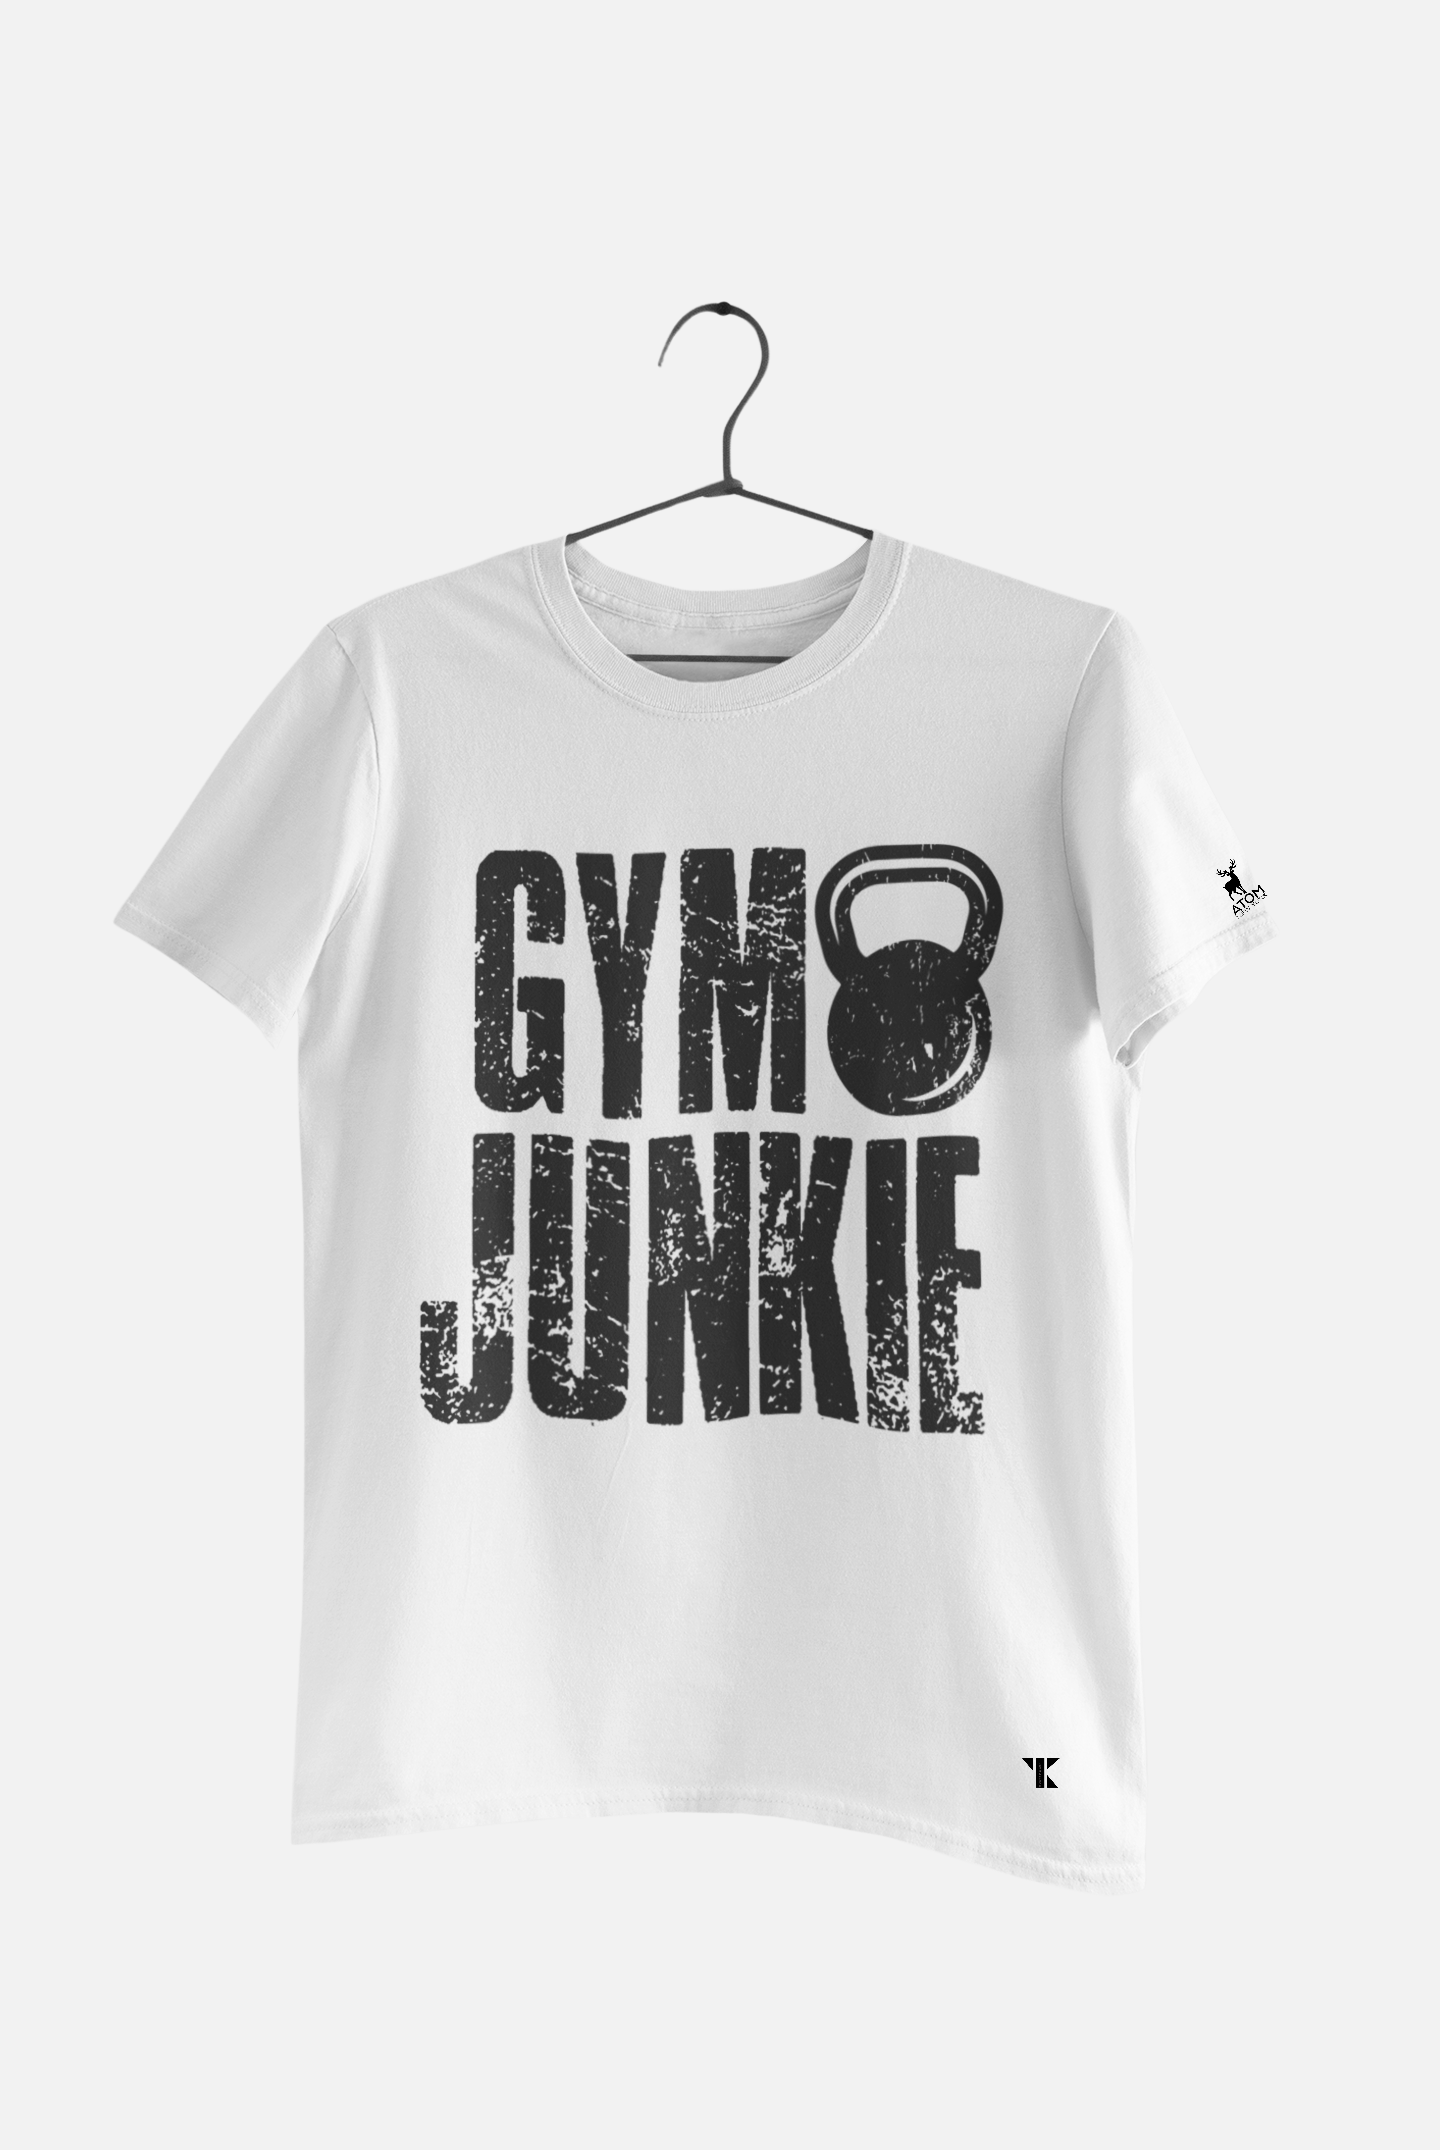 Gym Junkie White Pure Cotton T-Shirt For Men | Tarun Kapoor Collection